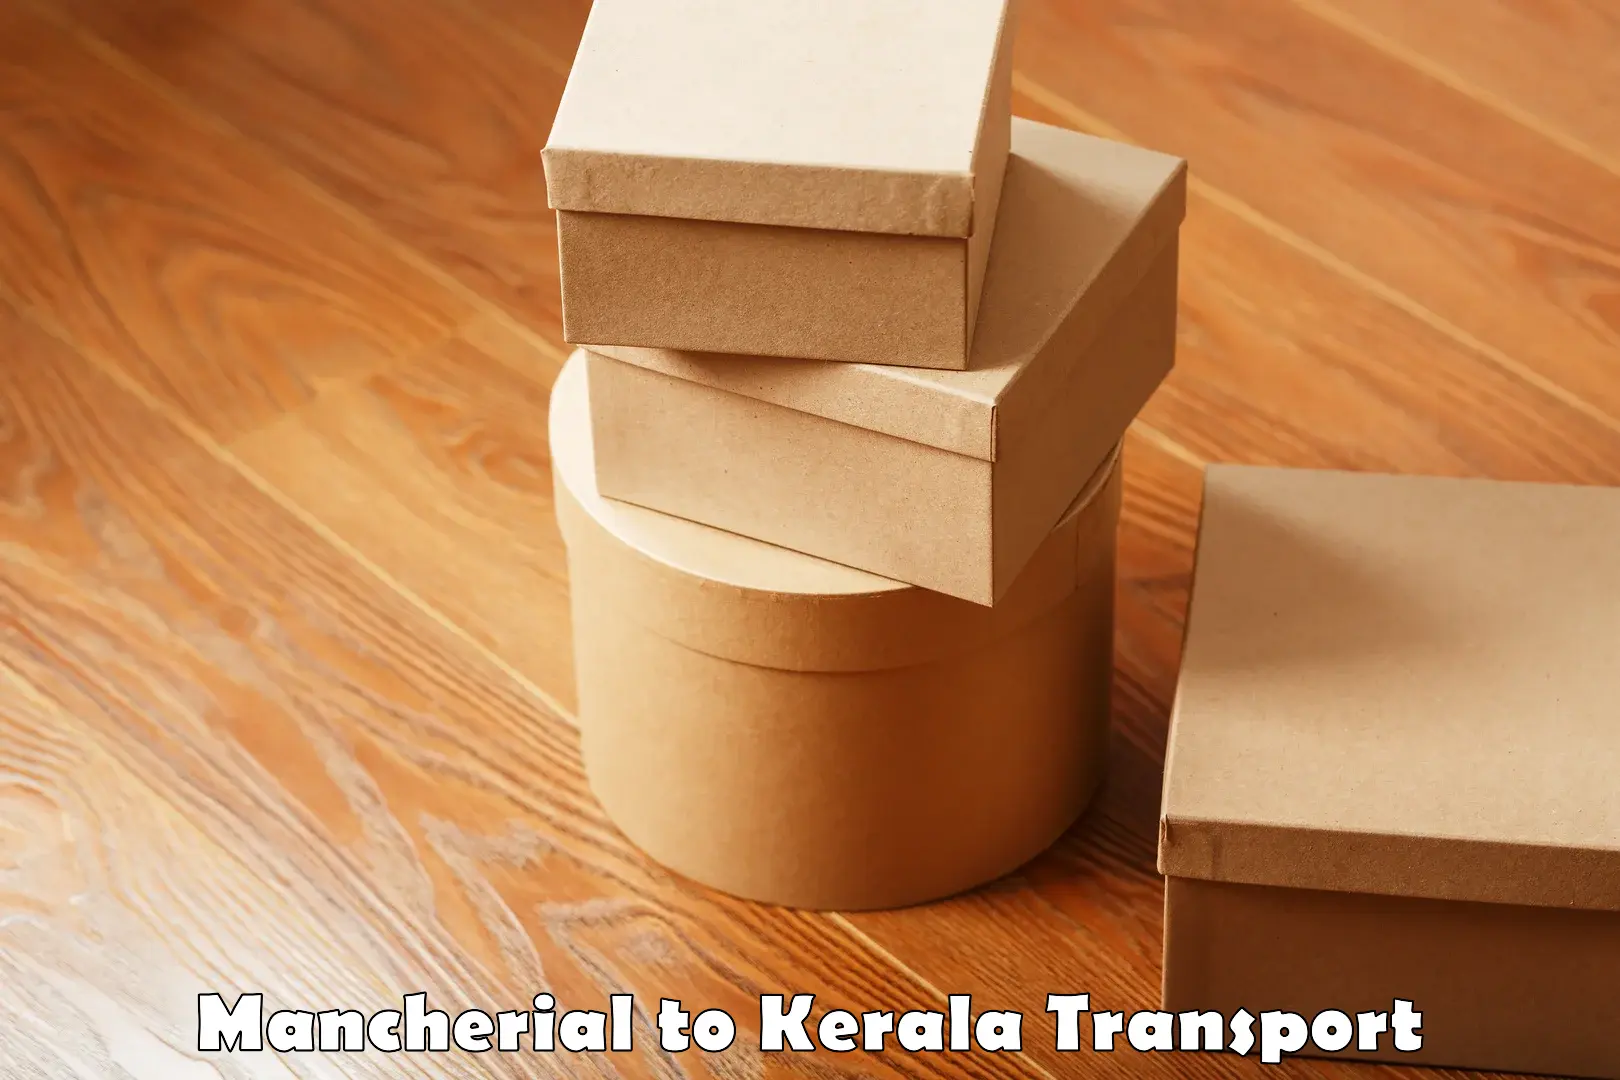 Truck transport companies in India Mancherial to Shoranur